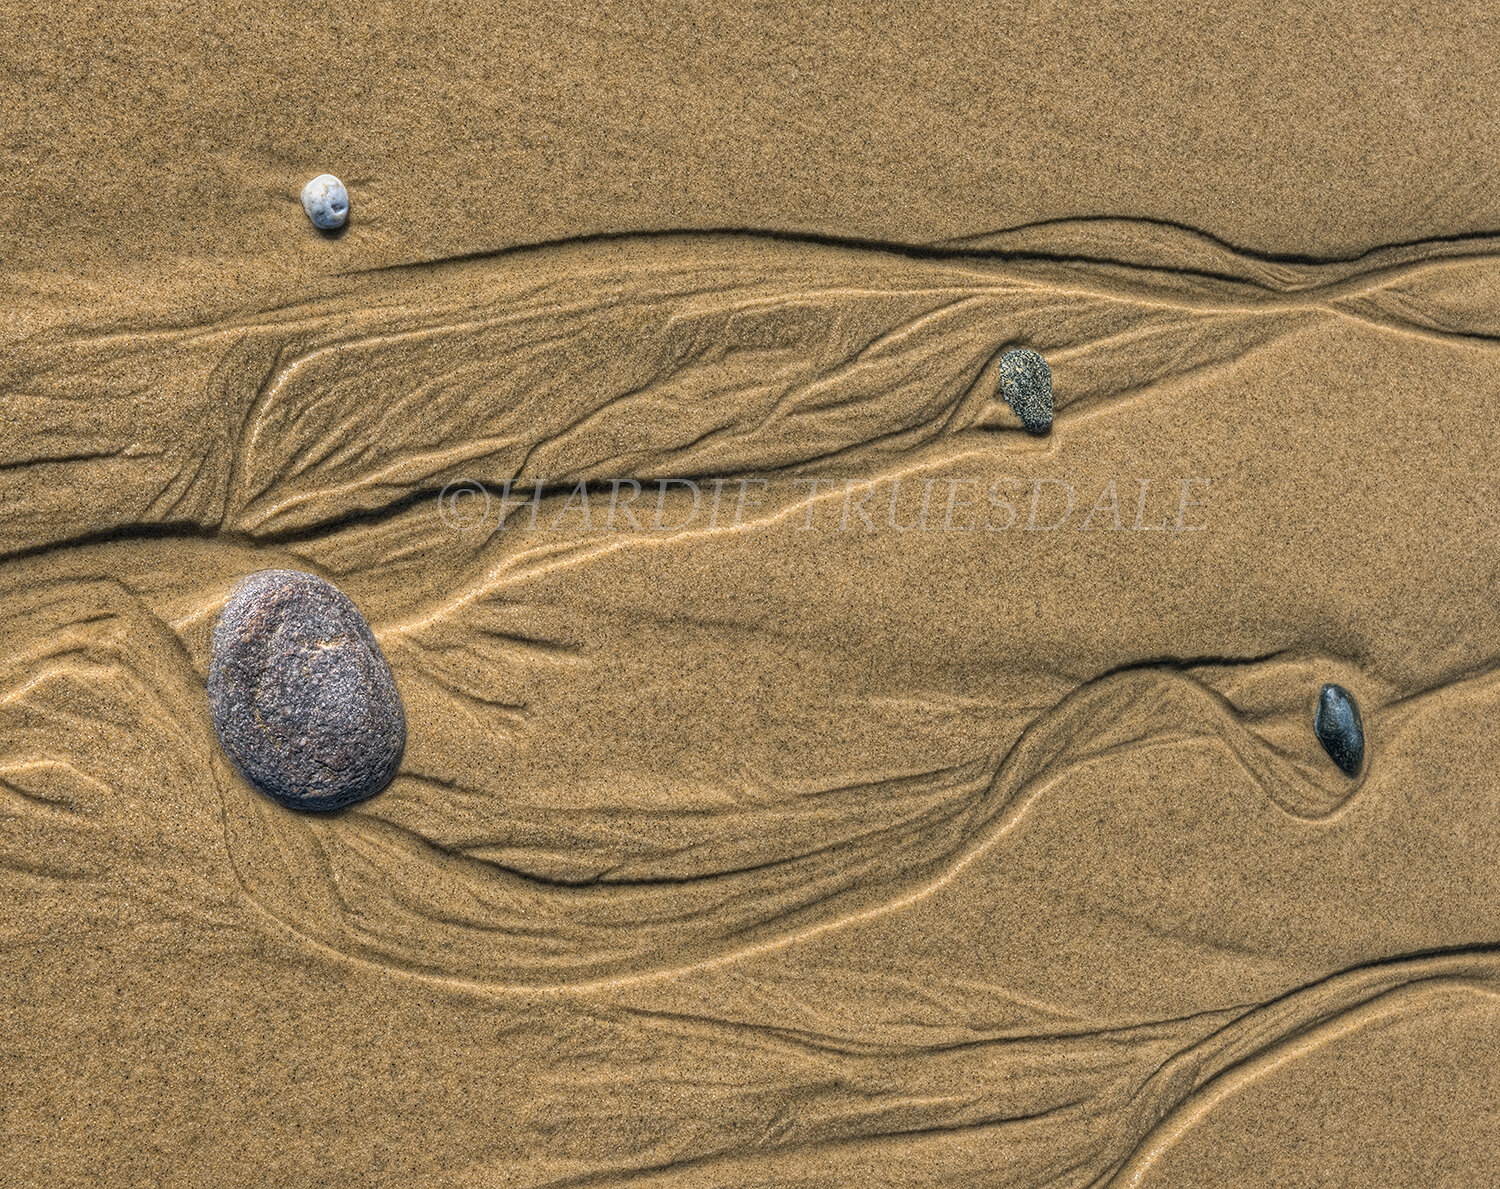 CC#44 "Tidal Sand and Pebble Patterns"